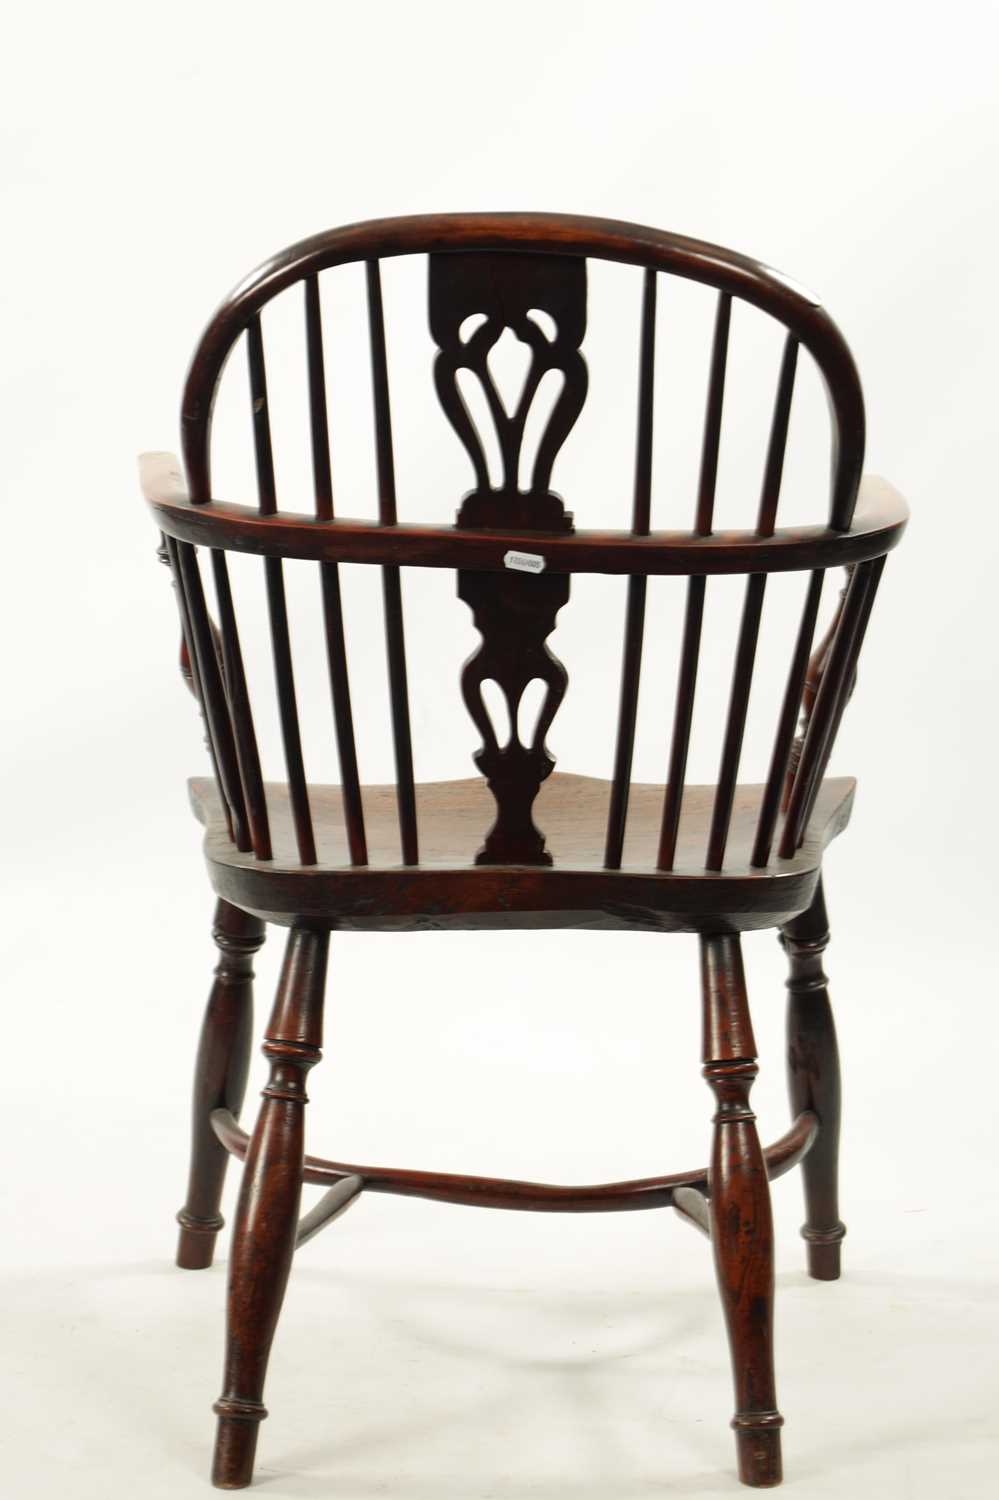 AN EARLY 19TH CENTURY YEW WOOD LOW BACK WINDSOR CHAIR - Image 6 of 6